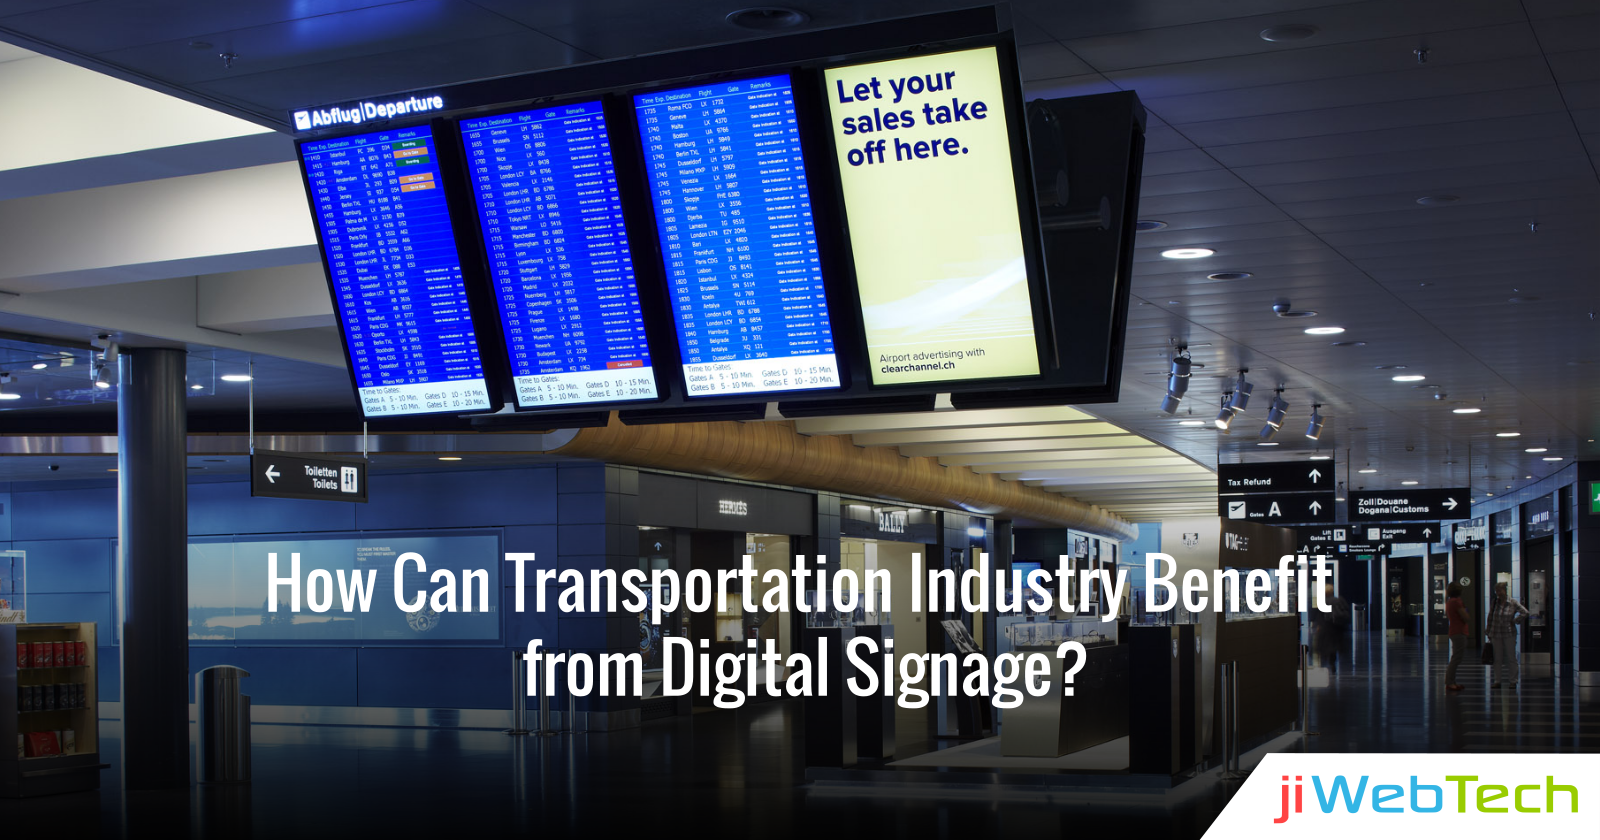 How Can Transportation Industry Benefit from Digital Signage?